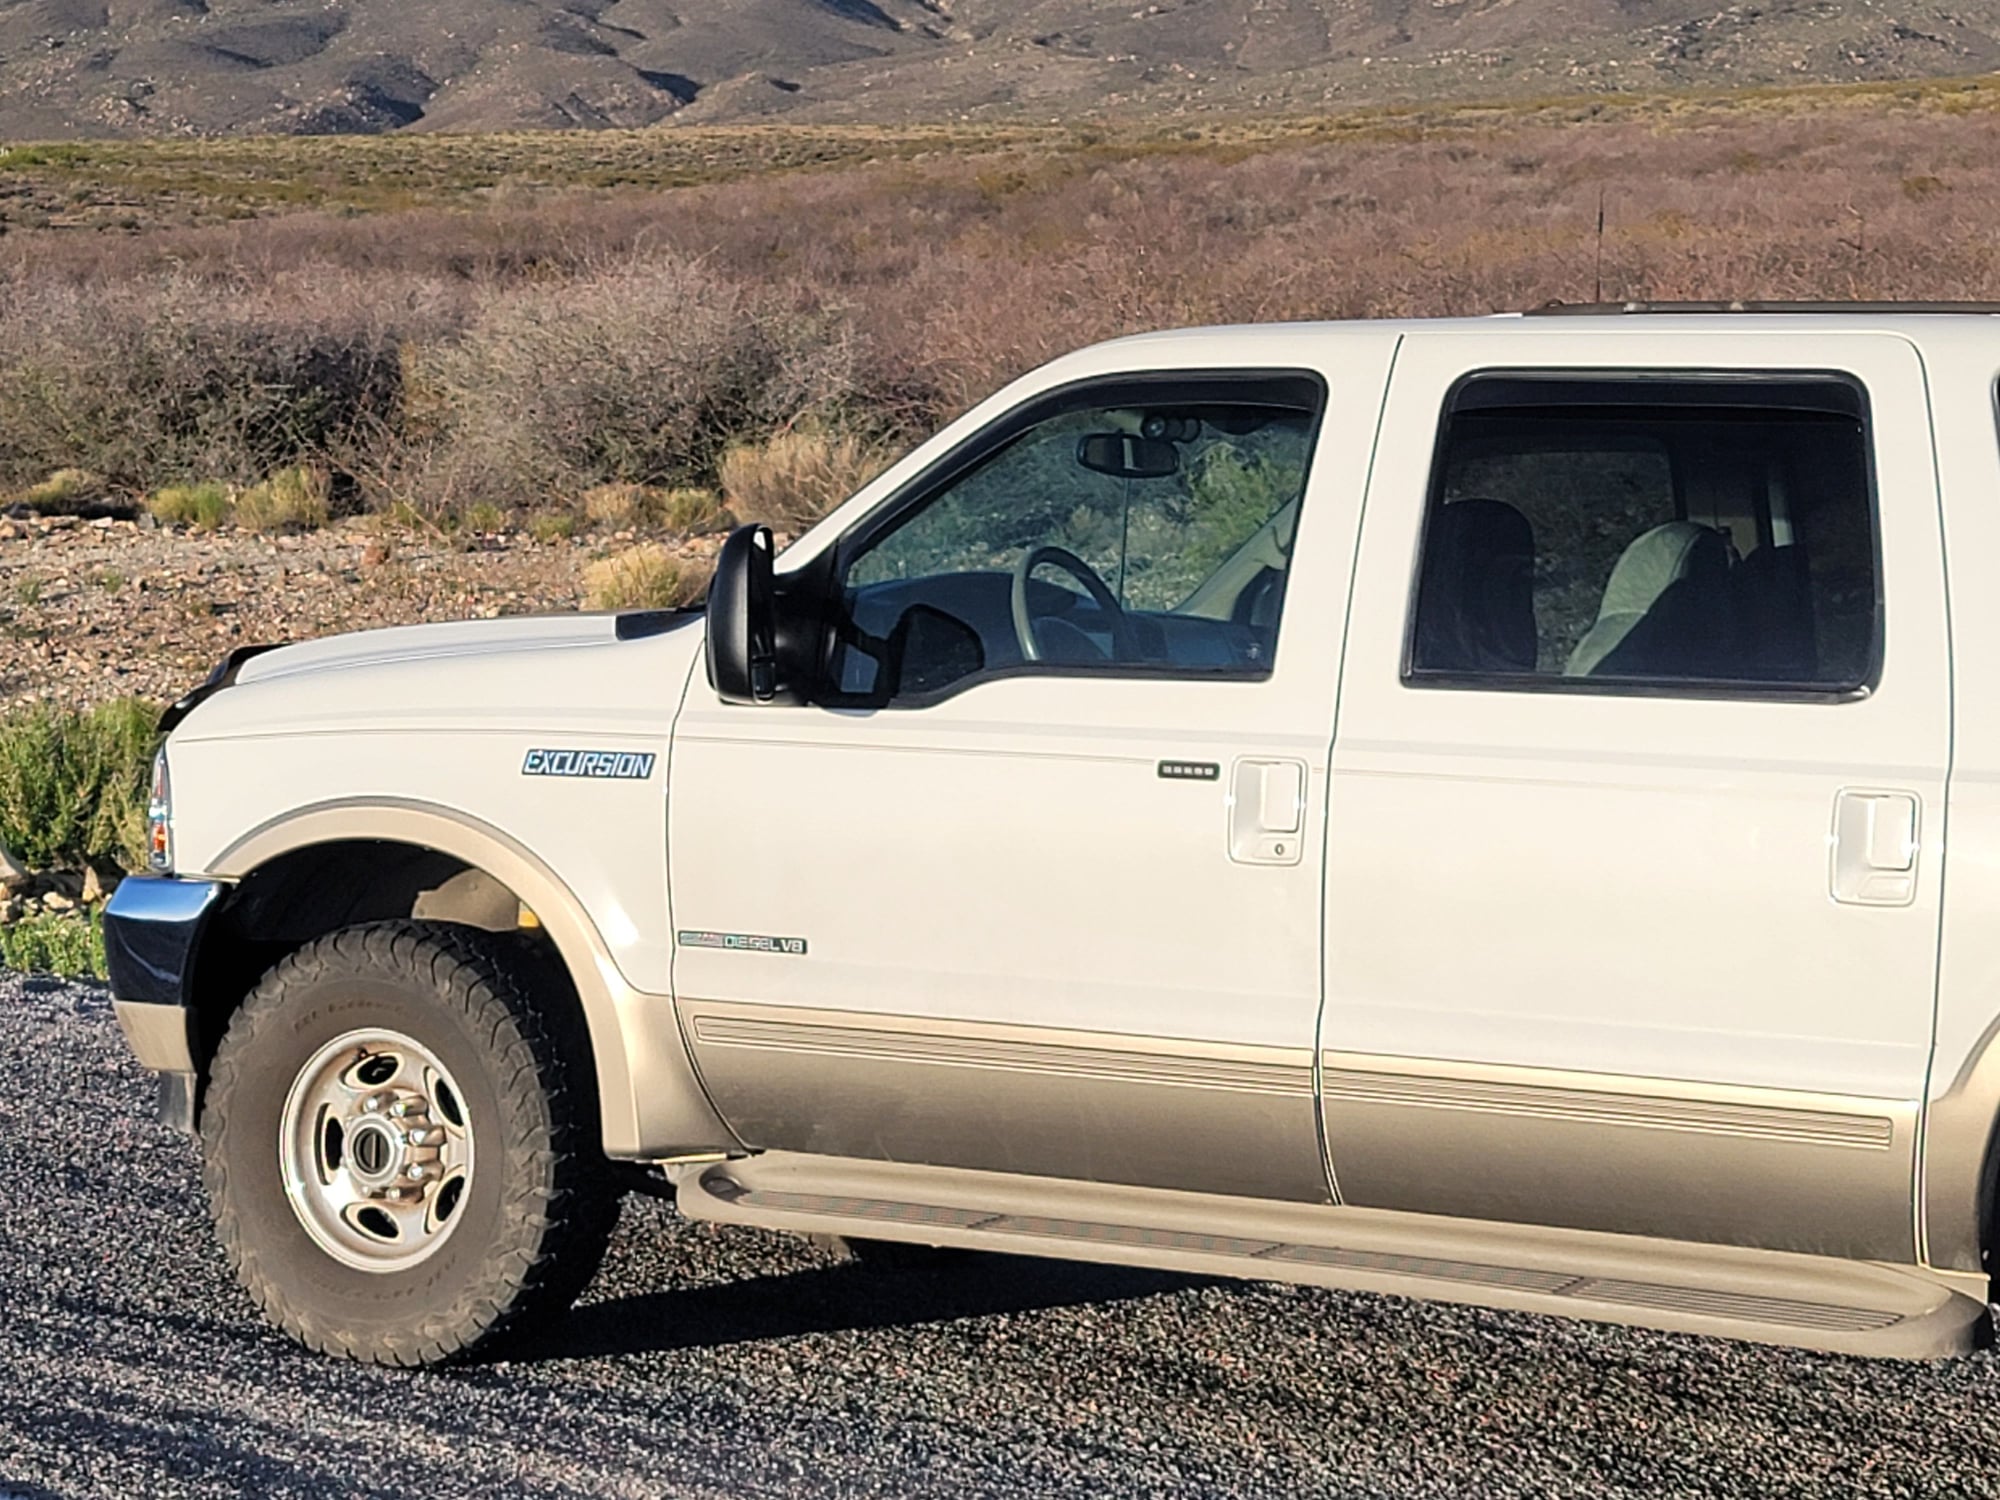 2001 Ford Excursion - 2001 Ford Excursion Limited, 7.3L, 4x4, BTS transmission - Used - Las Cruces, NM 88011, United States